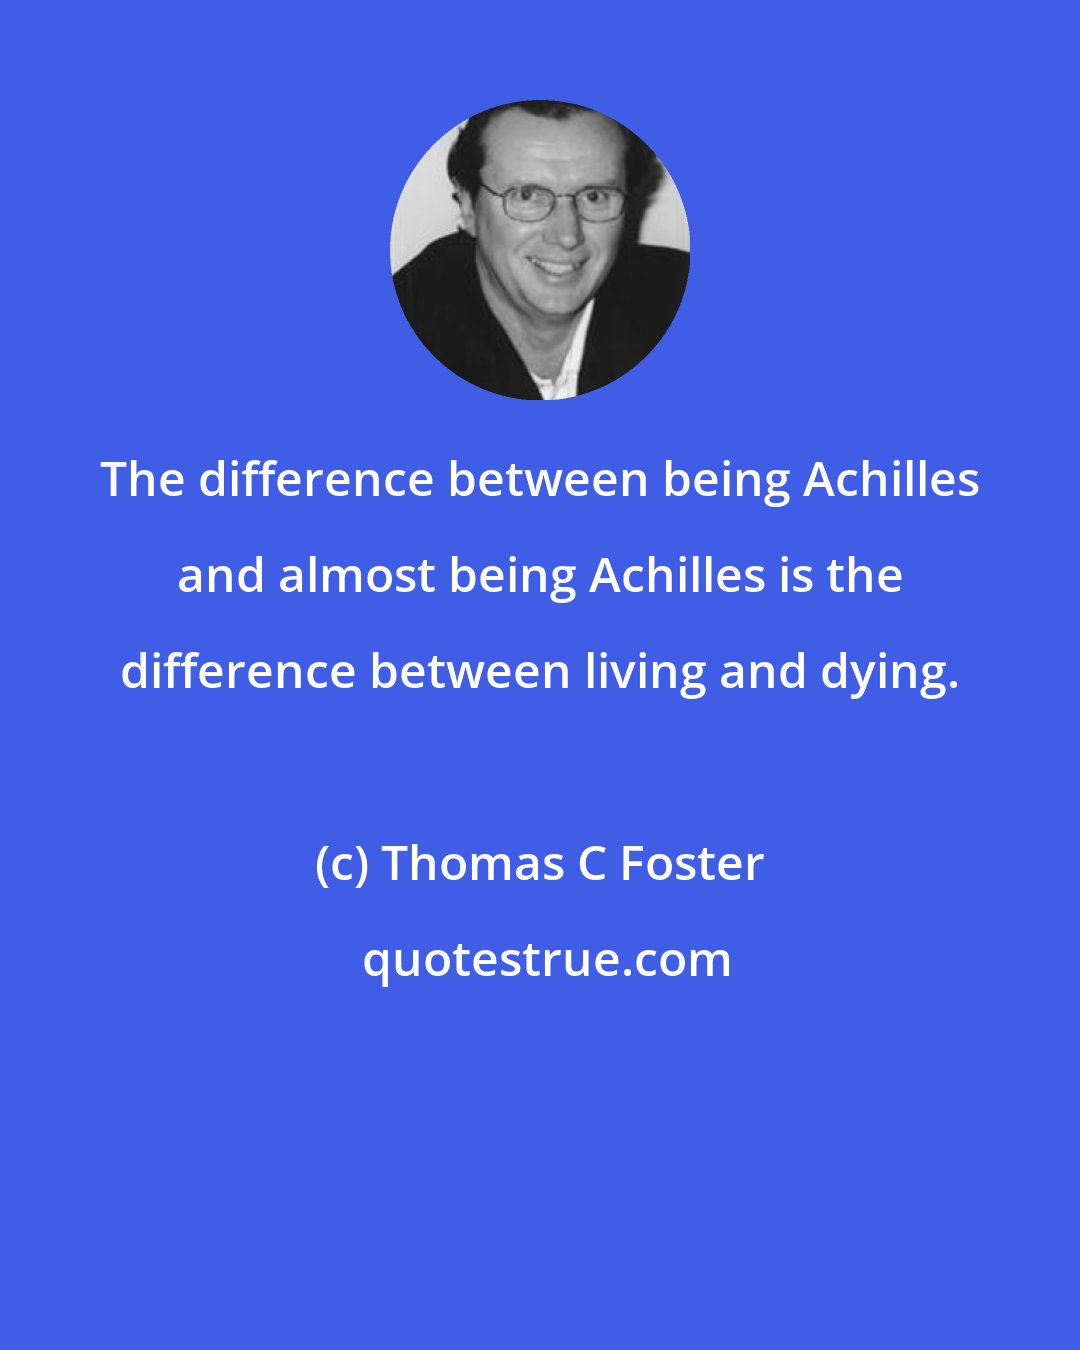 Thomas C Foster: The difference between being Achilles and almost being Achilles is the difference between living and dying.